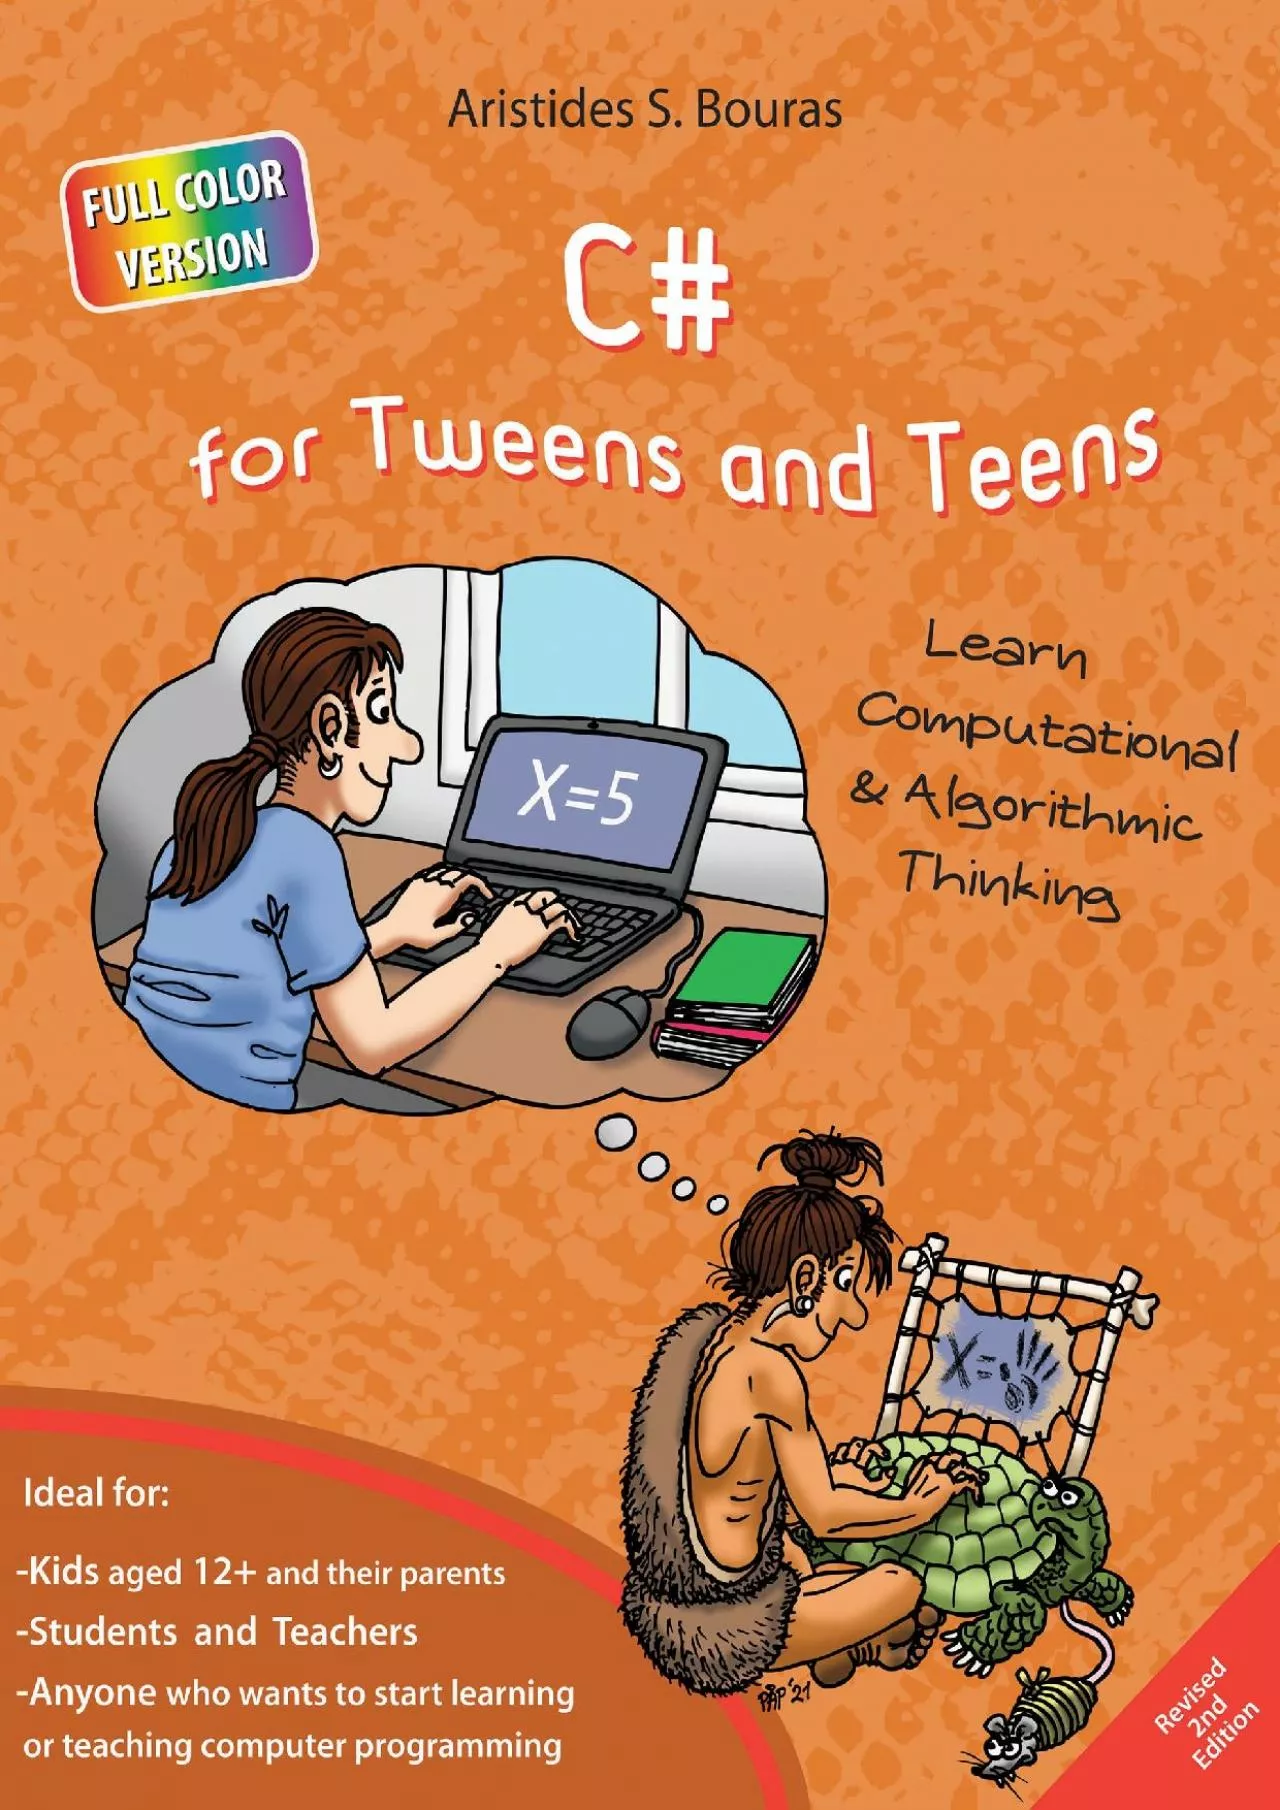 [READ]-C for Tweens and Teens - 2nd Edition (Full Color Version): Learn Computational